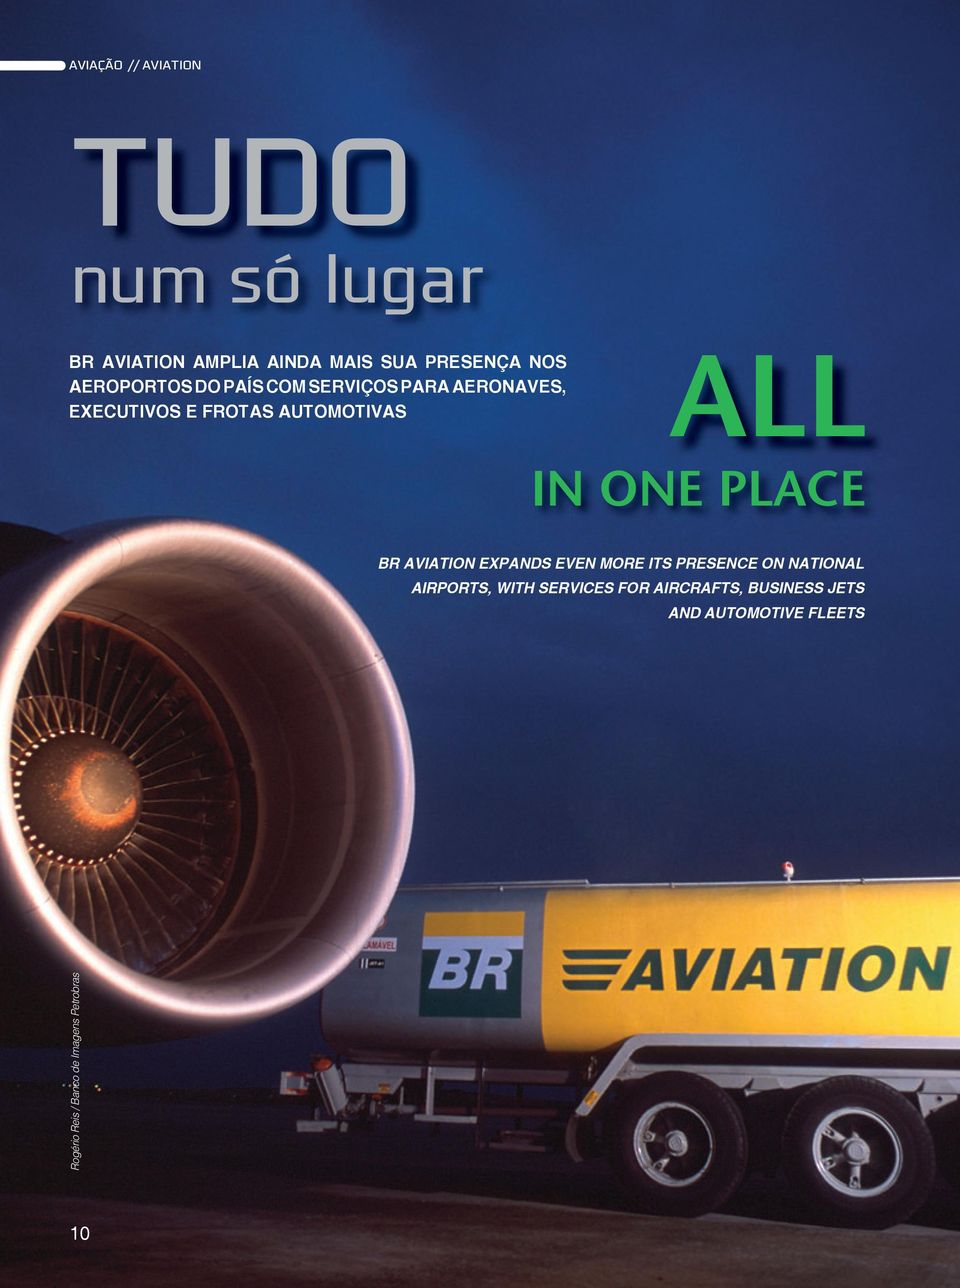 ONE PLACE BR AVIATION EXPANDS EVEN MORE ITS PRESENCE ON NATIONAL AIRPORTS, WITH SERVICES